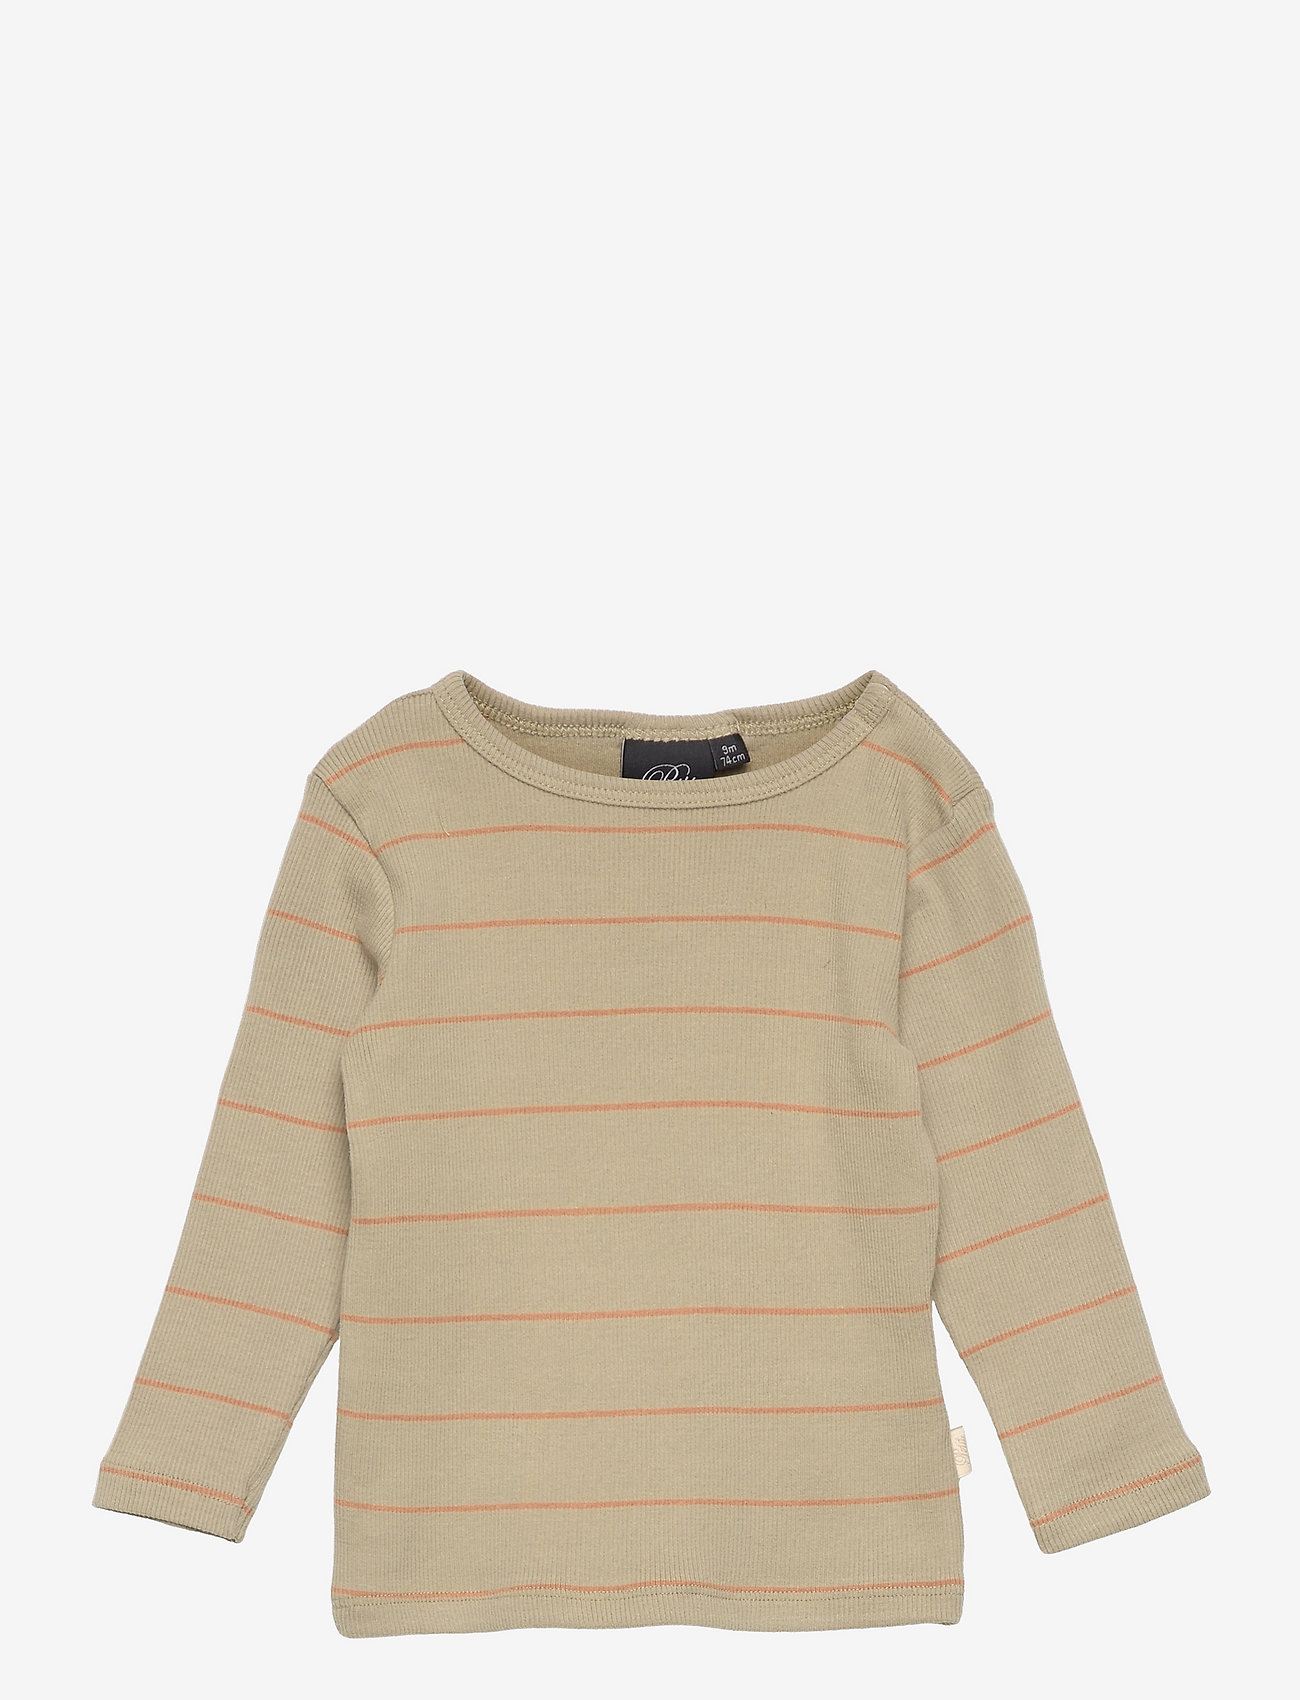 Sofie Schnoor Baby and Kids - T-shirt long-sleeve - långärmade t-shirts - dusty green - 0